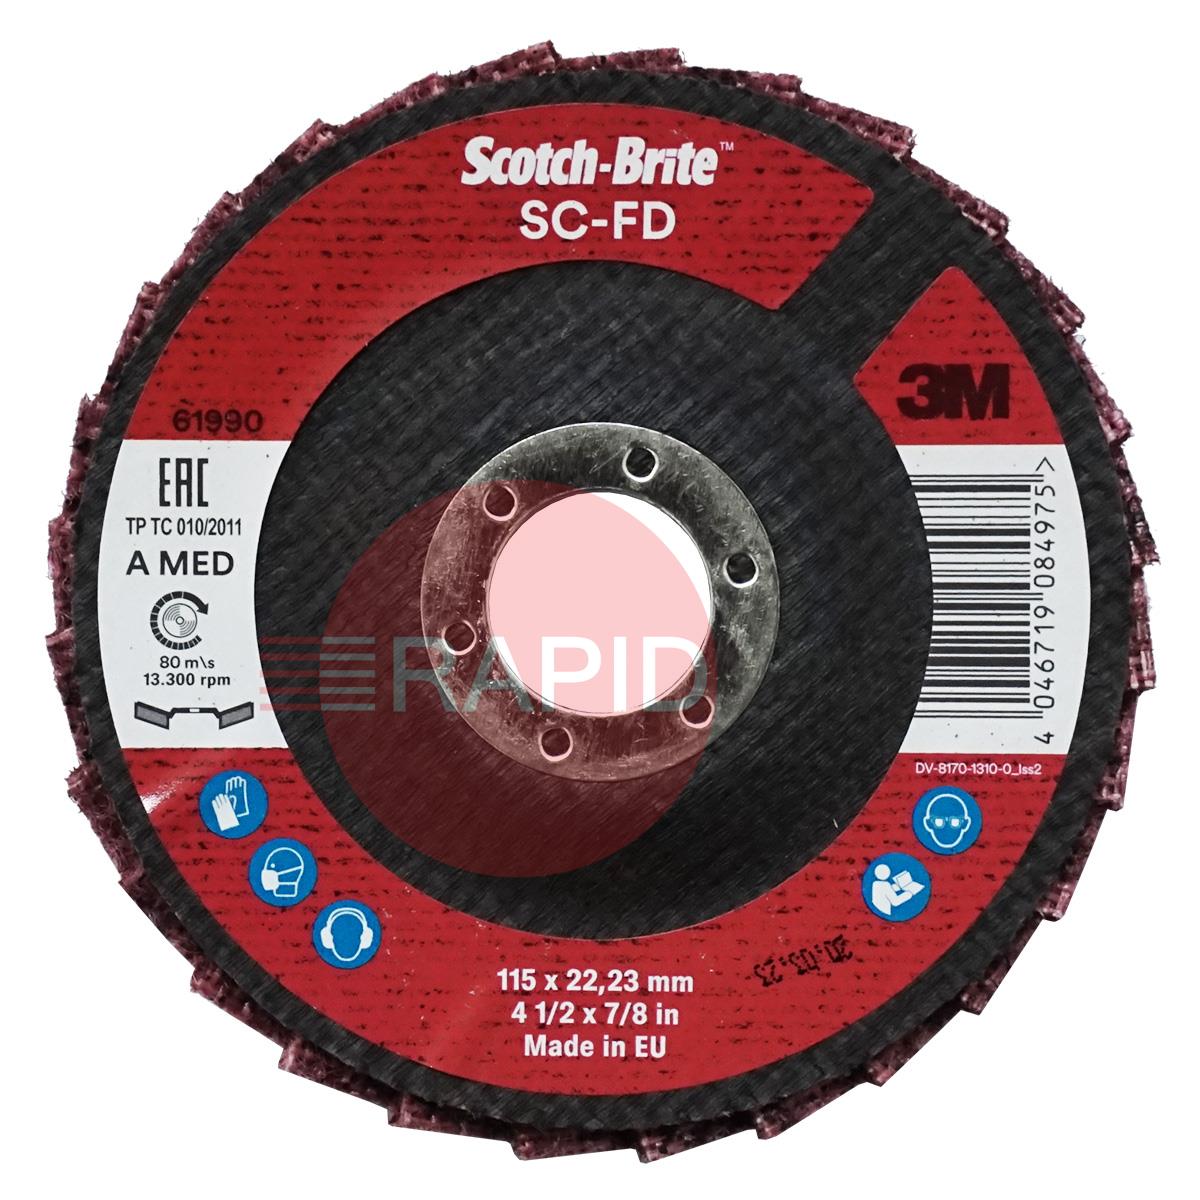 3M-61990  3M Scotch-Brite Surface Conditioning Flap Disc SC-FD, 115mm, A MED